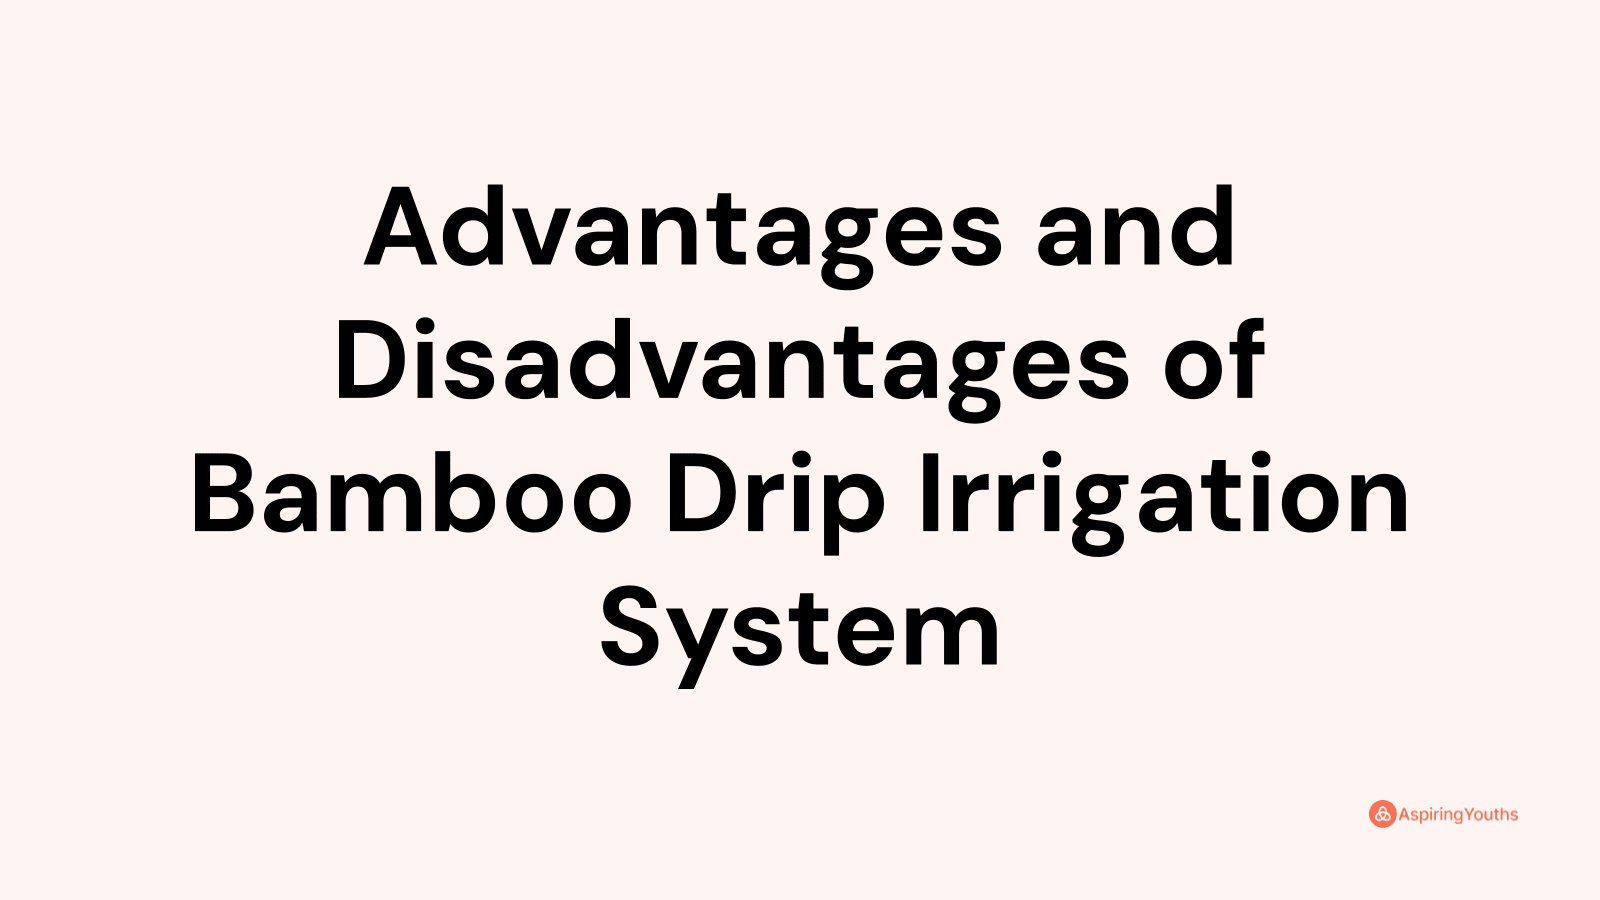 Advantages and disadvantages of Bamboo Drip Irrigation System